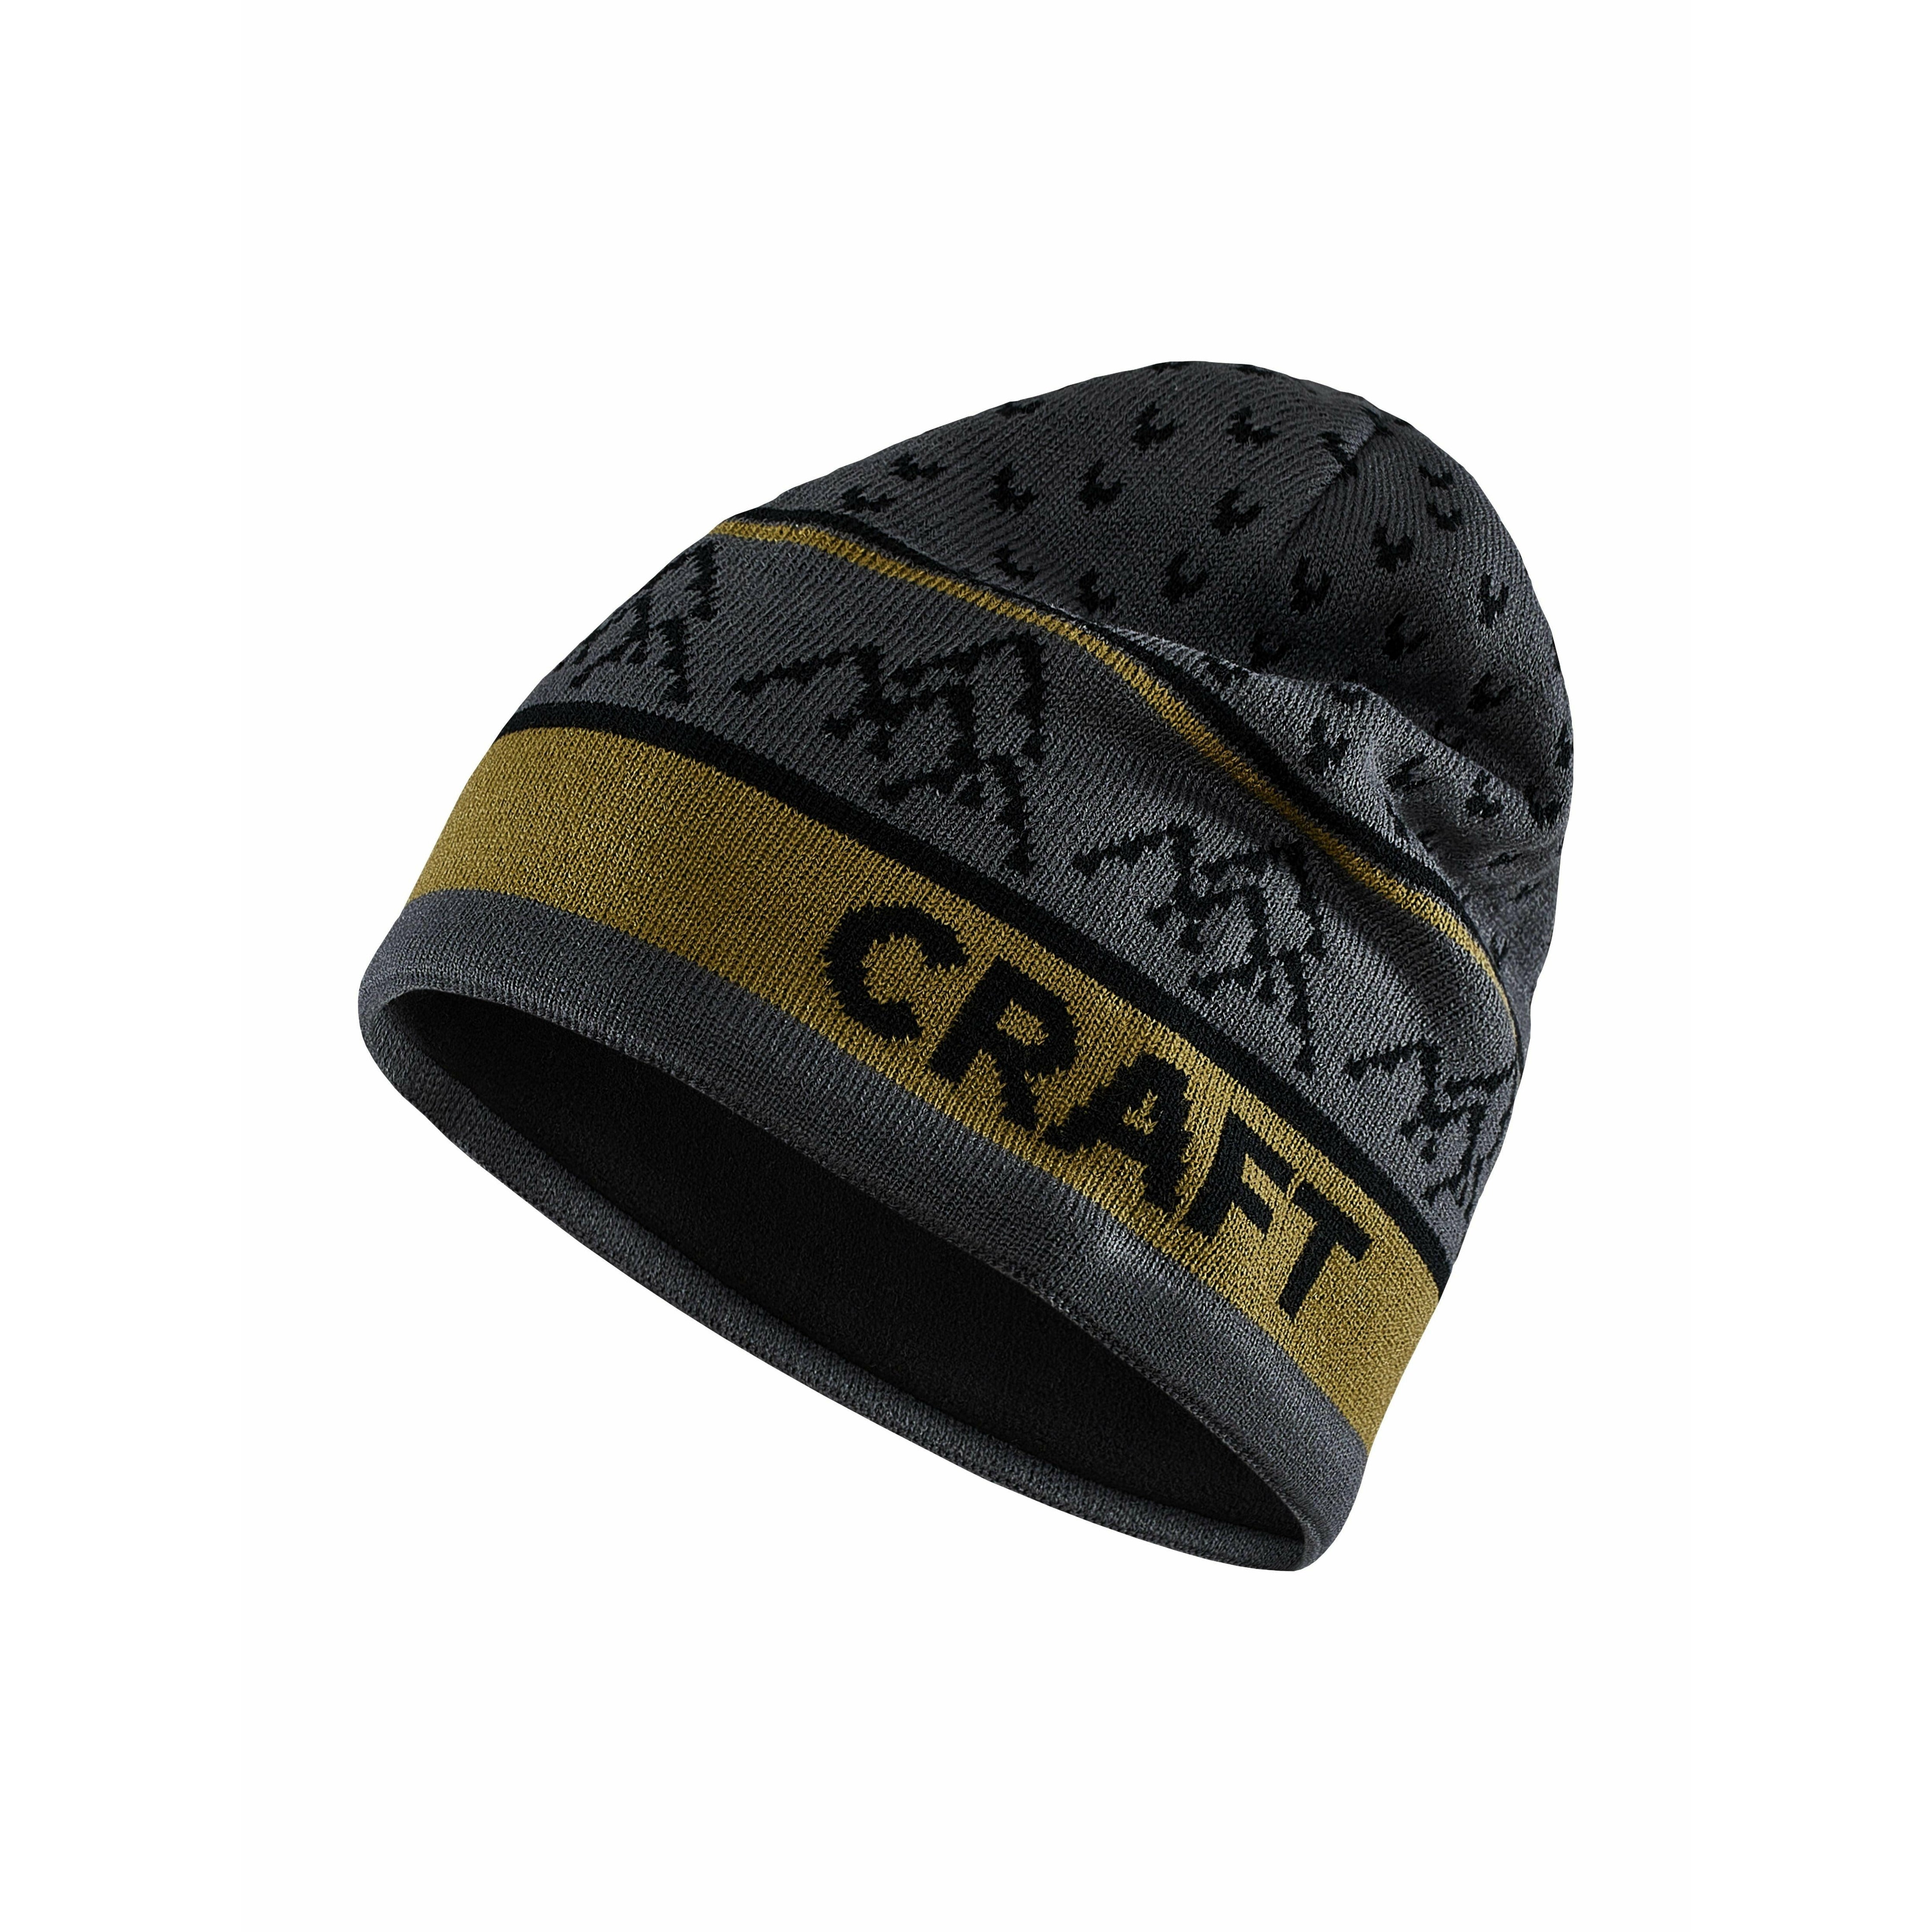 Craft Core Backcountry Knit Hat - Pioneer Midwest